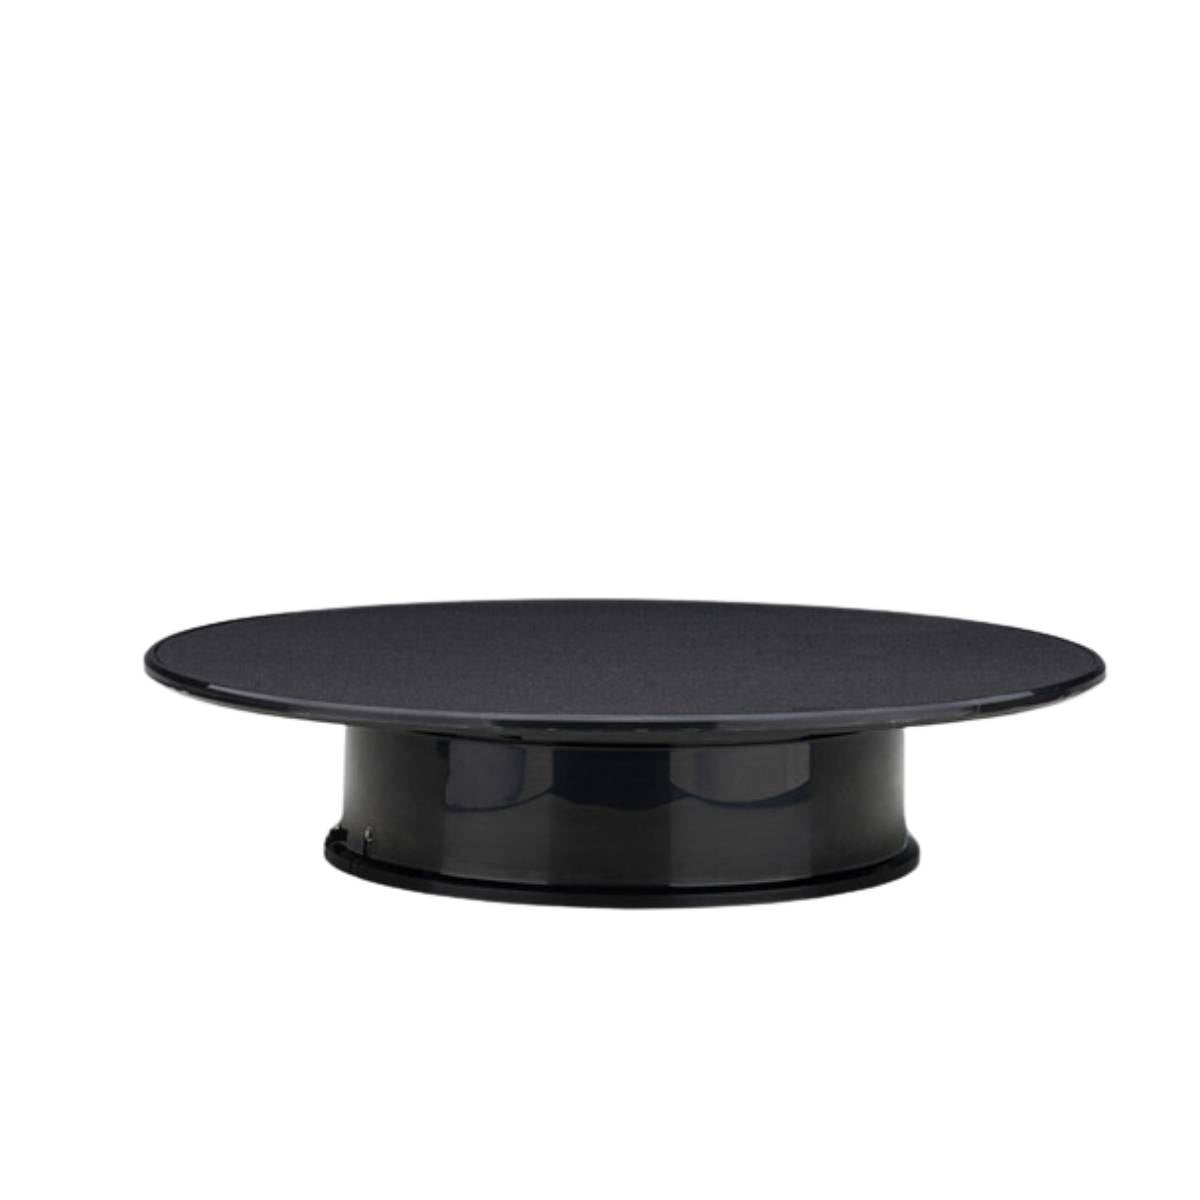 ROTARY DISPLAY STAND (MEDIUM/DIAMETER 25.5 CM) (BLACK) - OTHER Scale Other Model Accessory